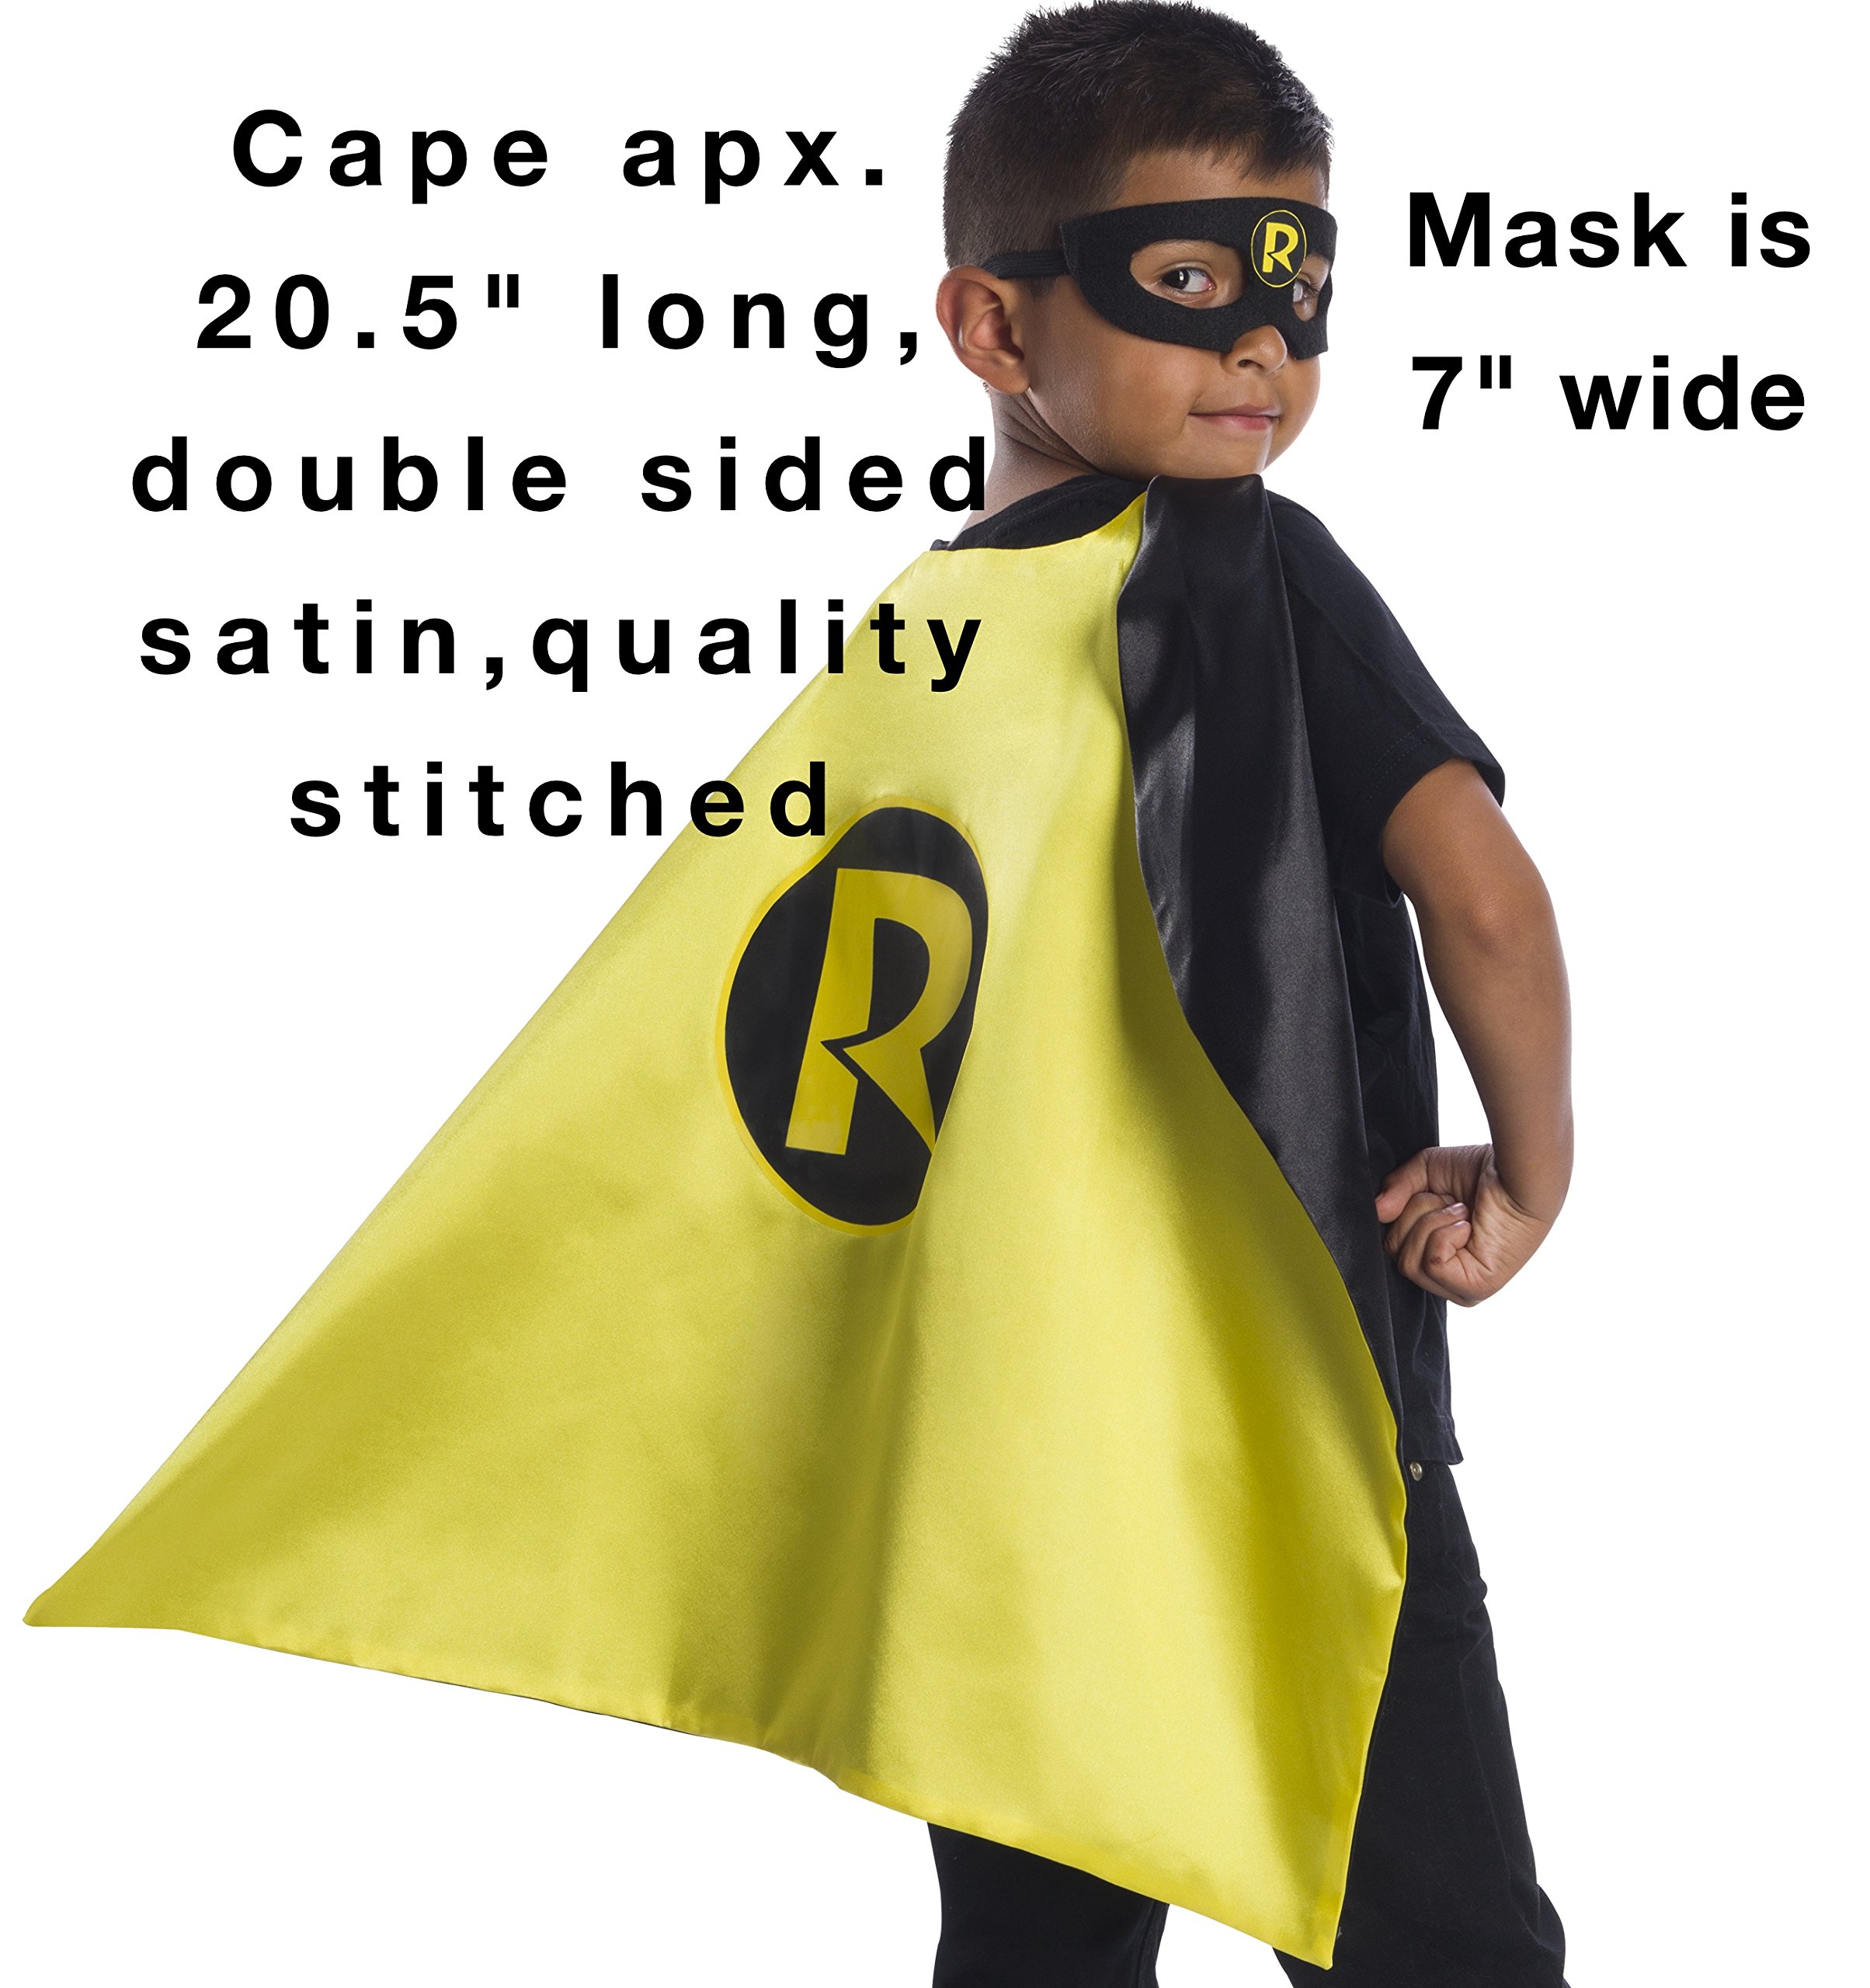 Rubie's Super Hero Cape Set Officially licensed DC Comics Assortment 4 Capes, 3 Masks, and 1 Chest Piece, Black, Yellow and Red,One Size (Amazon Exclusive)